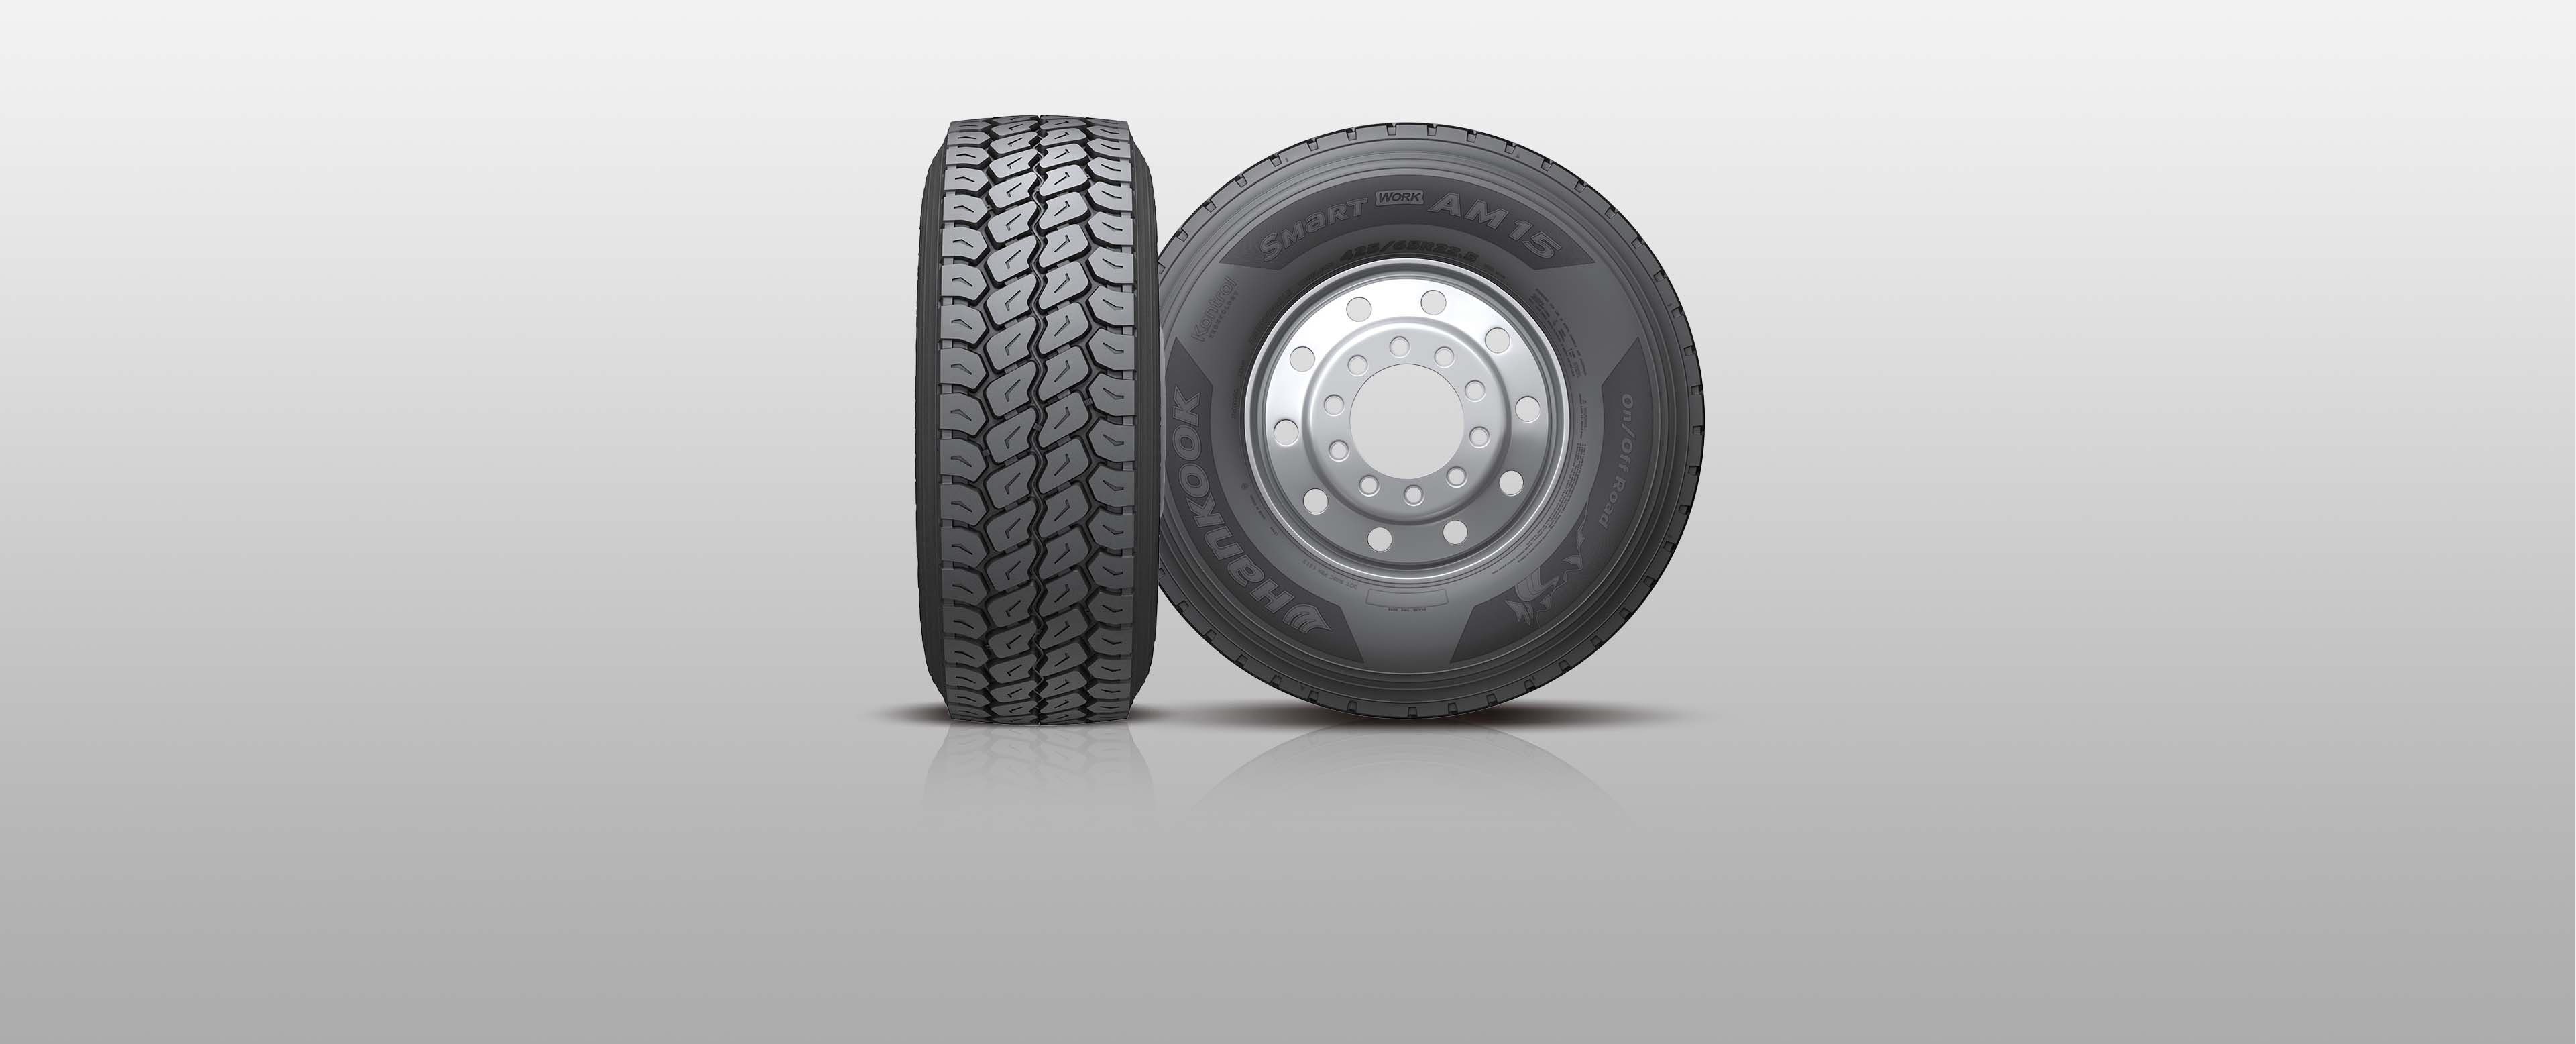 Hankook Tire & Technology-Tires-Smart-Smart Work-AM15-On and off road all position tires, maximized for longer mileage